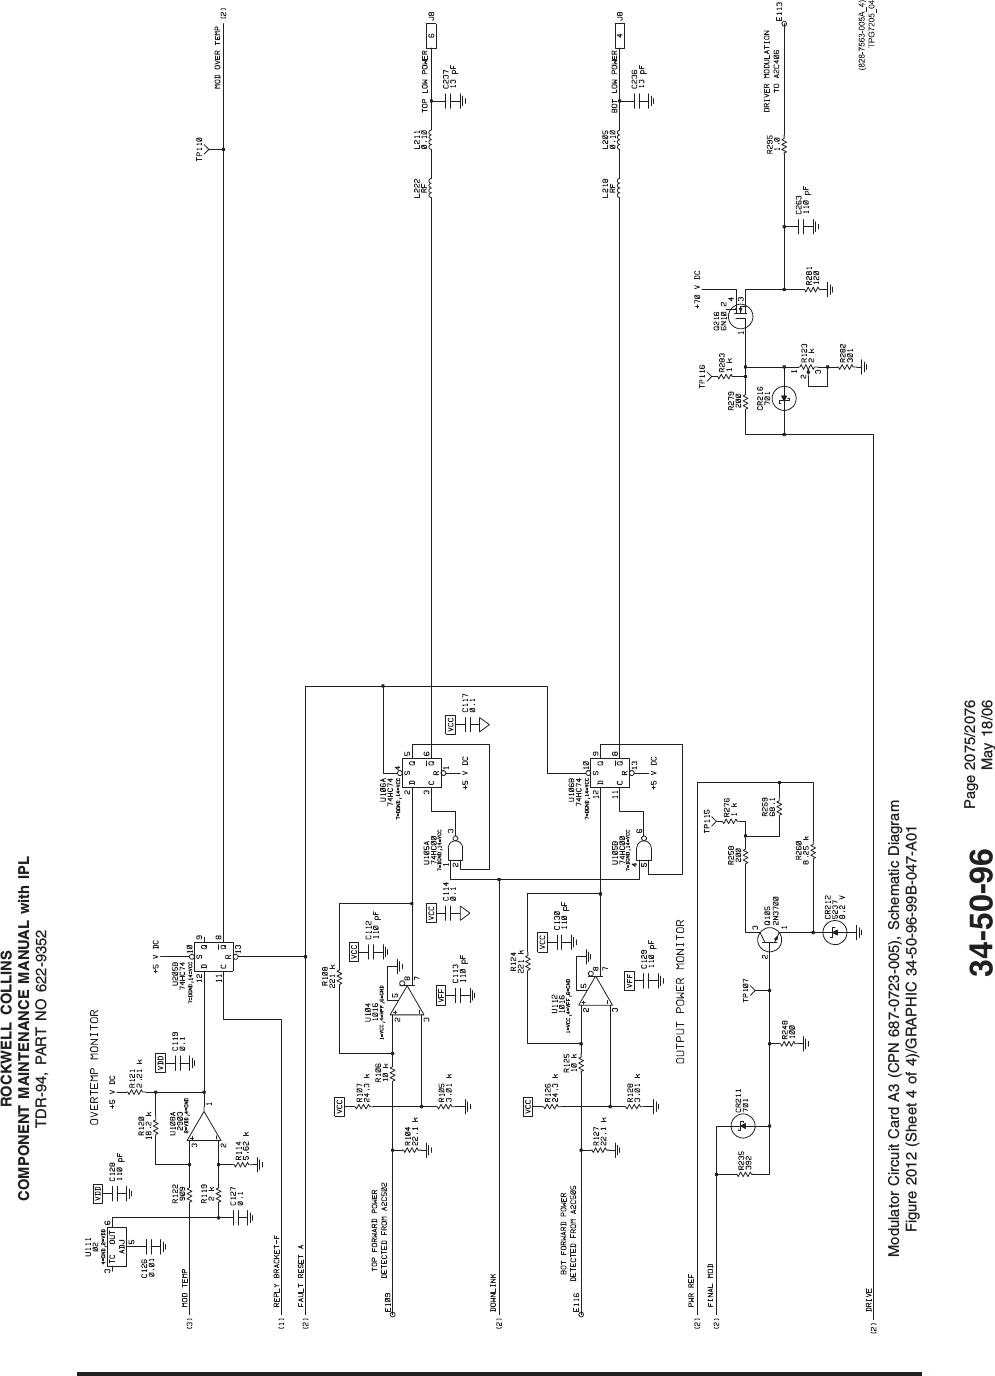 ROCKWELL COLLINSCOMPONENT MAINTENANCE MANUAL with IPLTDR-94, PART NO 622-9352Modulator Circuit Card A3 (CPN 687-0723-005), Schematic DiagramFigure 2012 (Sheet 4 of 4)/GRAPHIC 34-50-96-99B-047-A0134-50-96 Page 2075/2076May 18/06